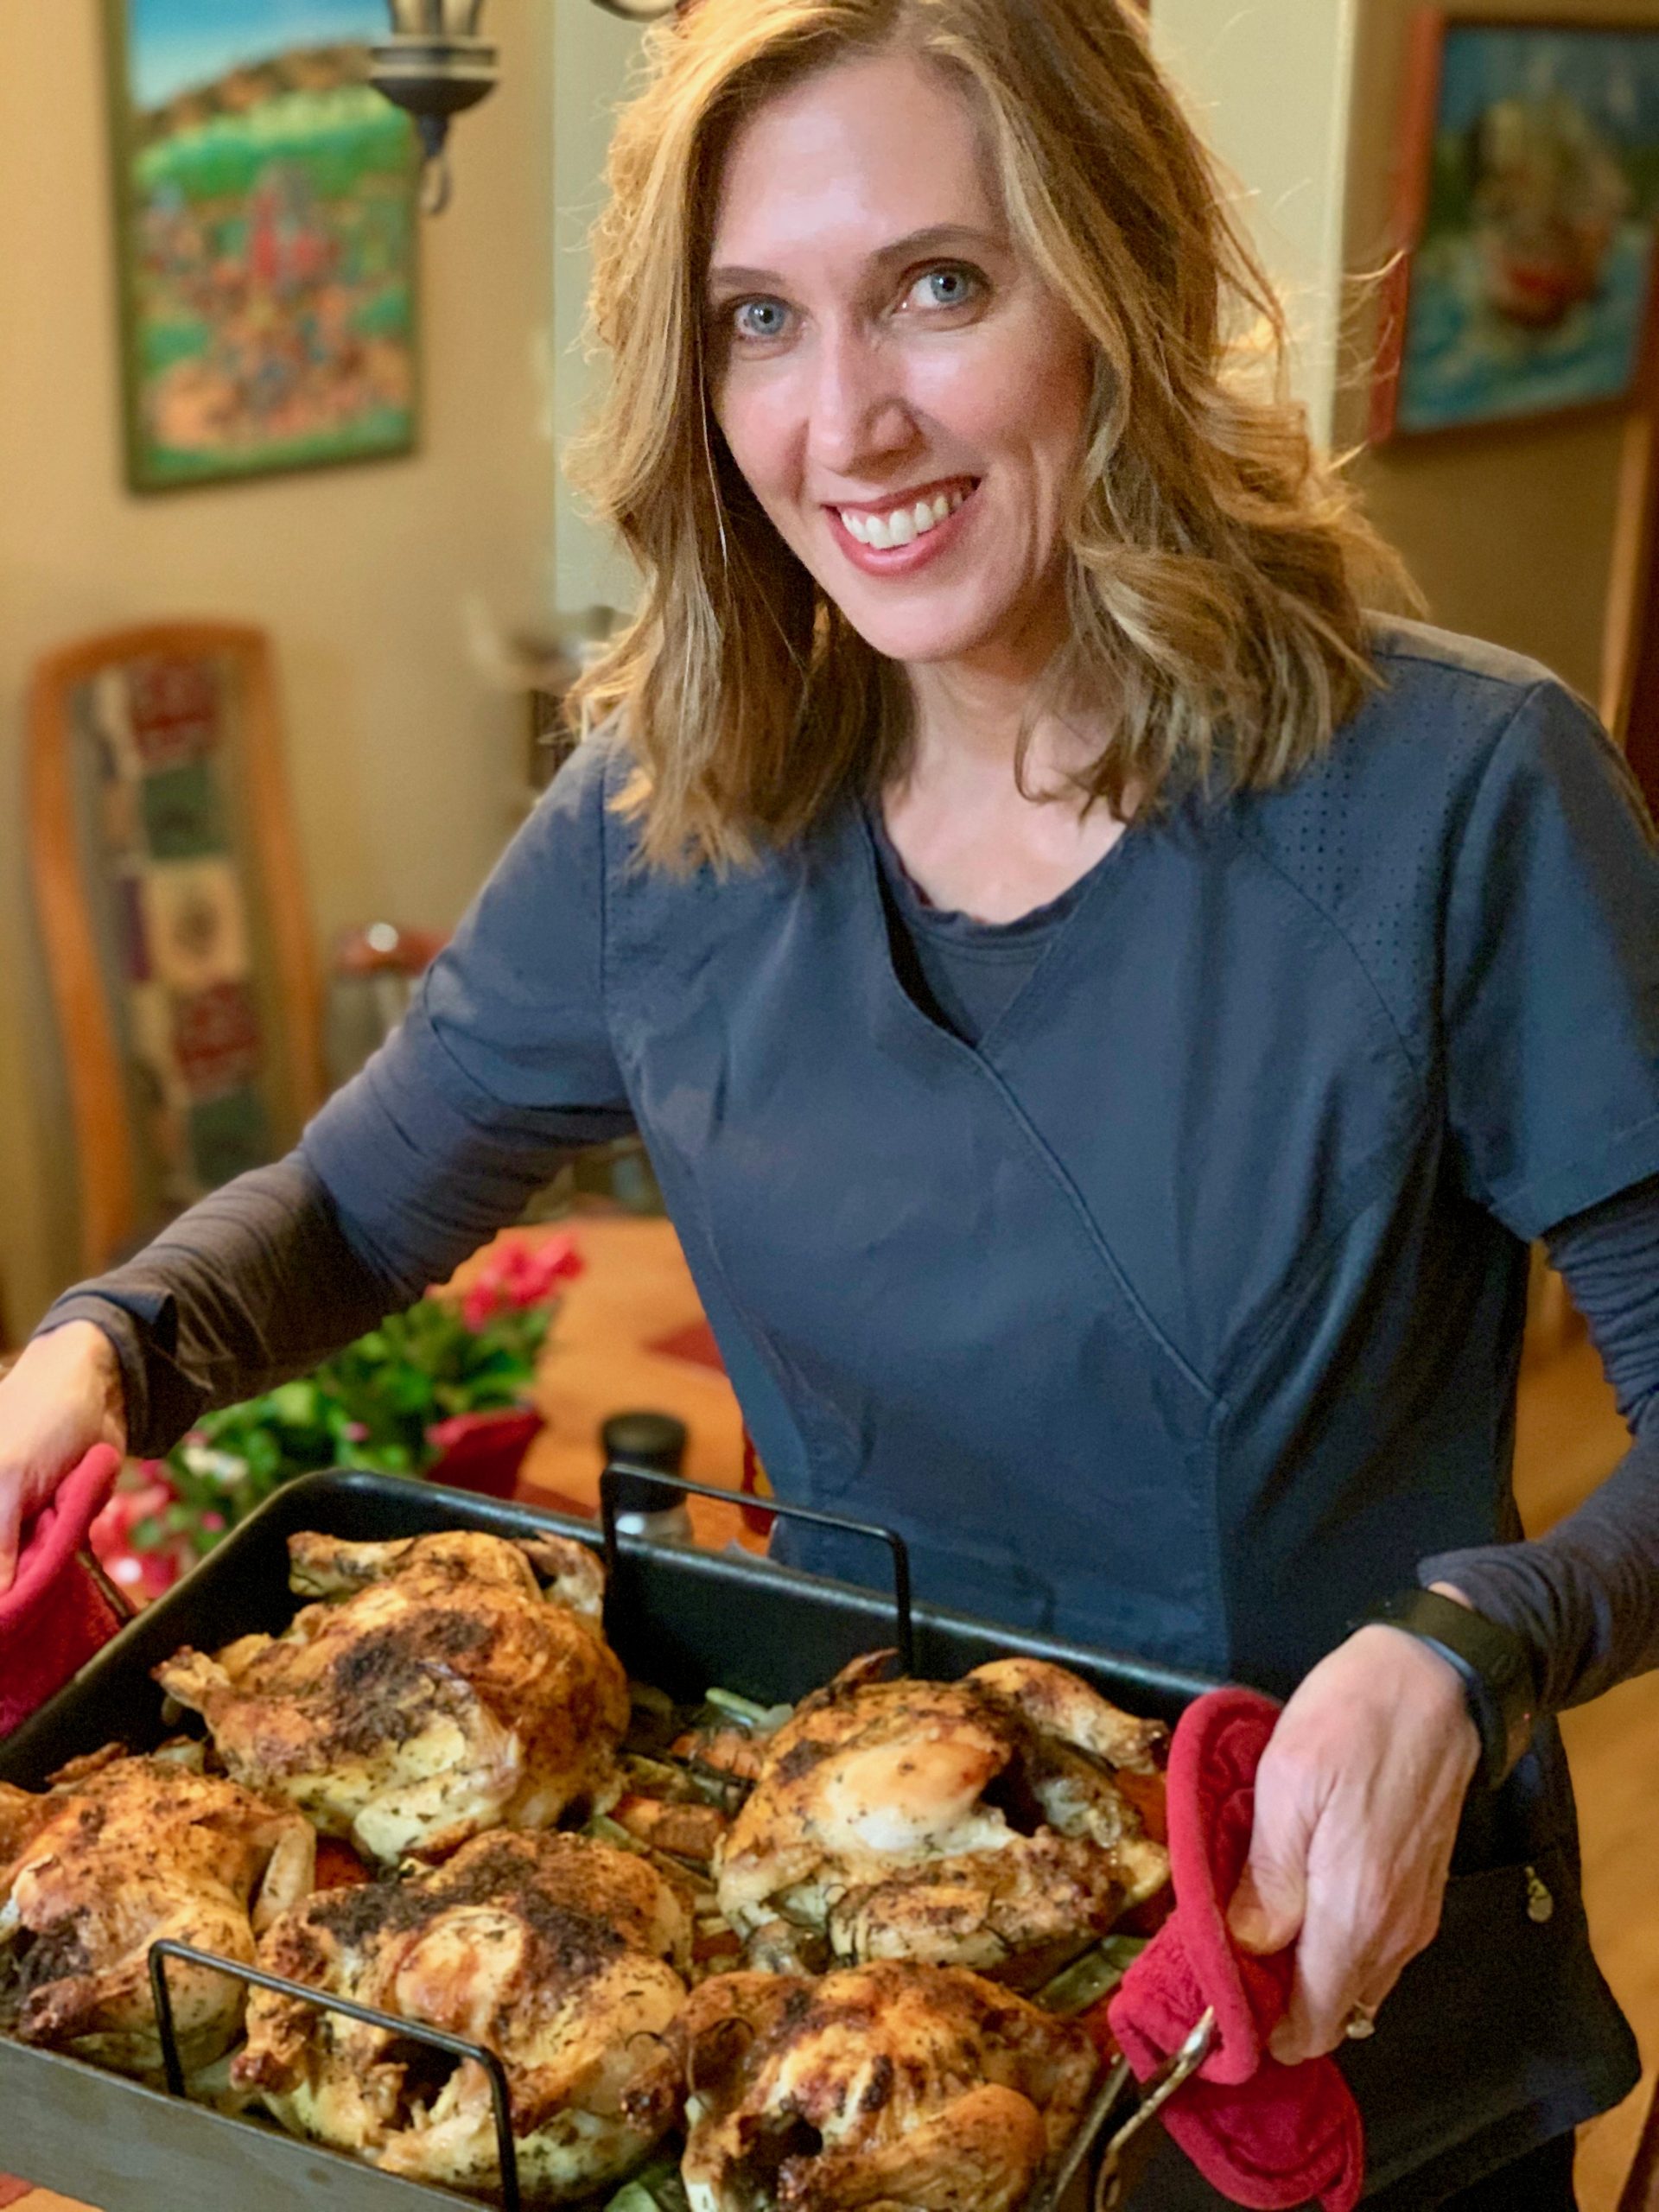 Julie prepared a delicious New Year's Eve dinner for our family prior to working a 12 hour overnight shift at the University of Iowa Hospital.